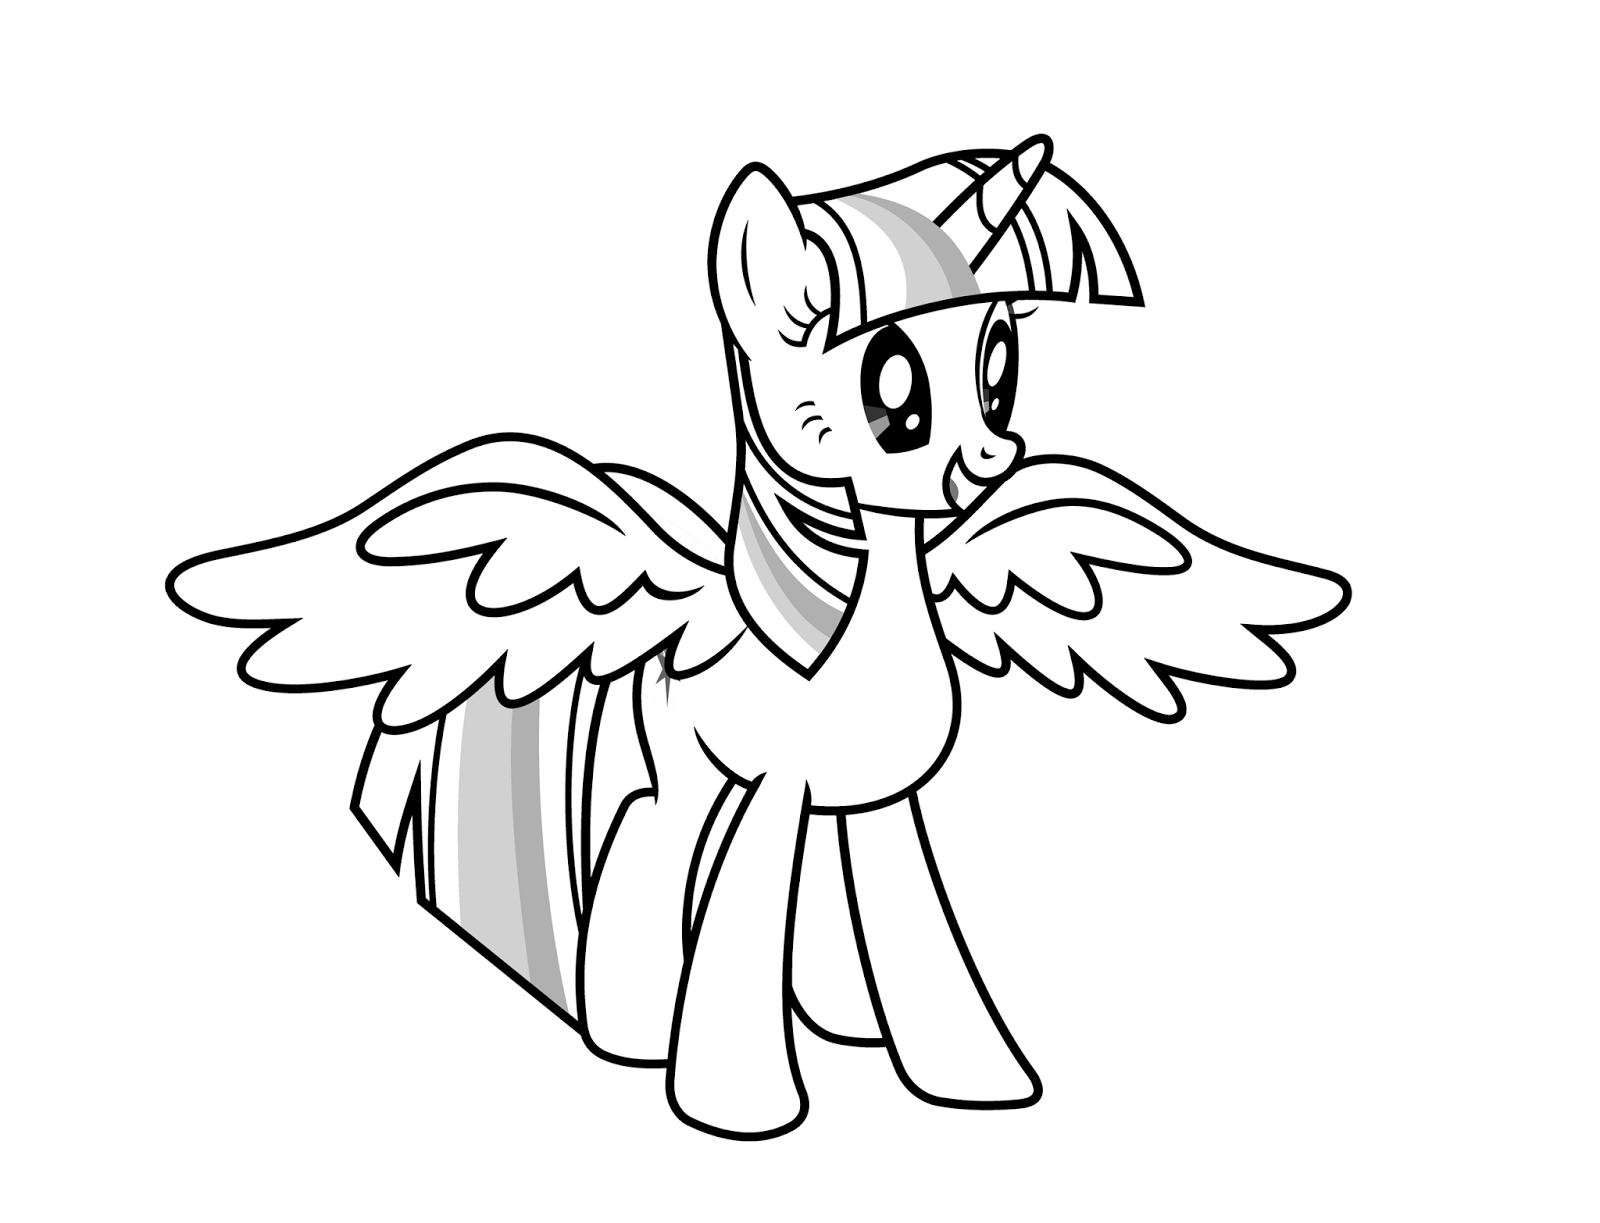 Twilight Sparkle Coloring Pages   Best Coloring Pages For Kids